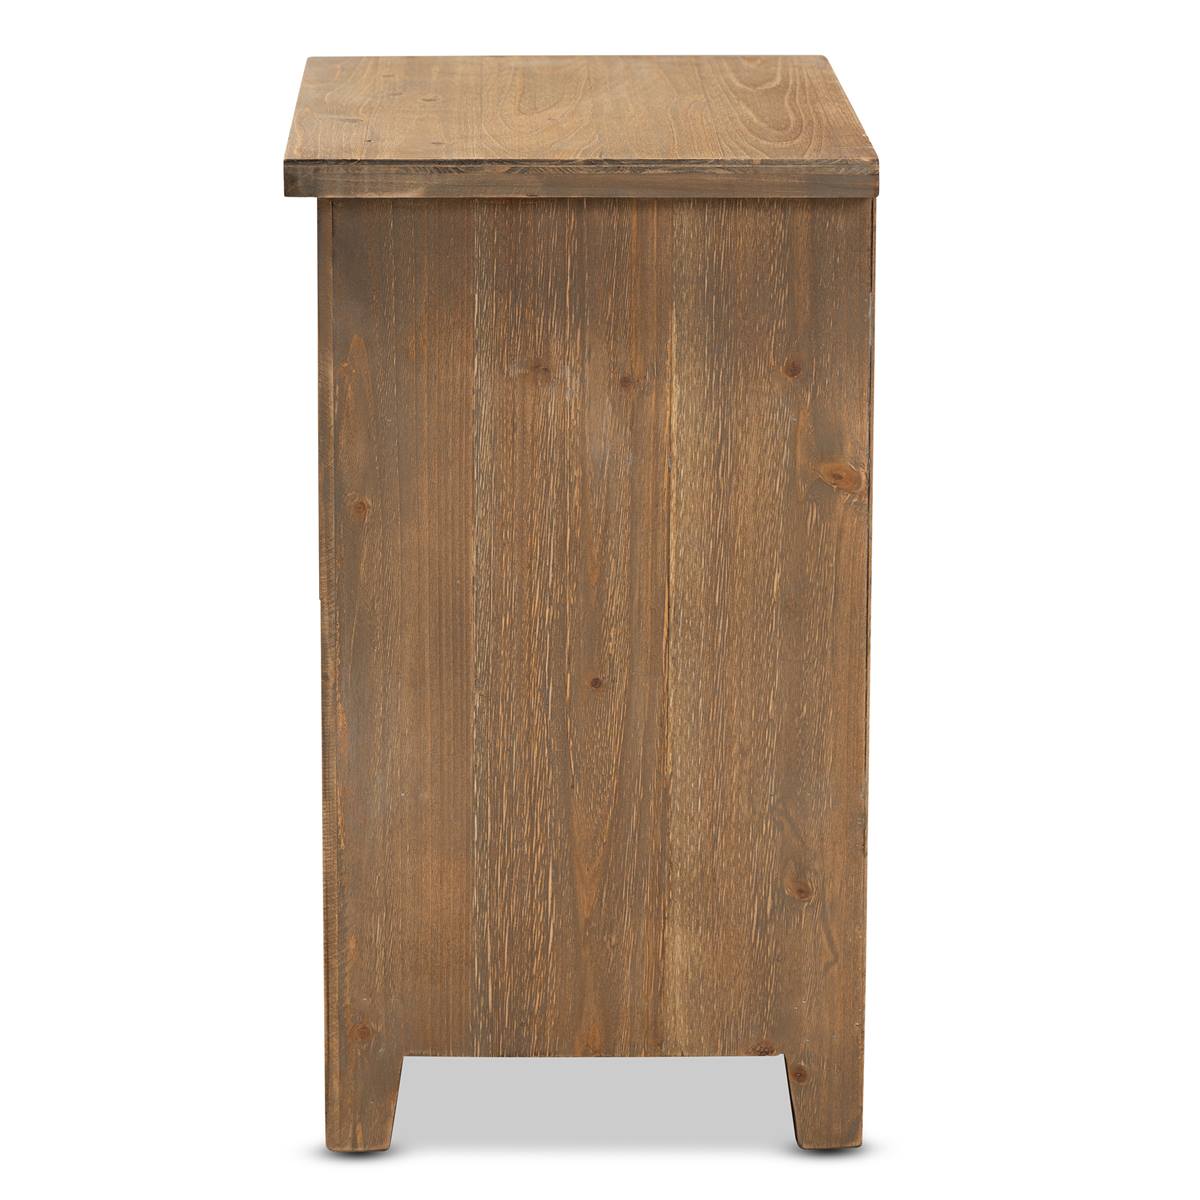 Baxton Studio Clement 2-Drawer Wood Spindle Nightstand